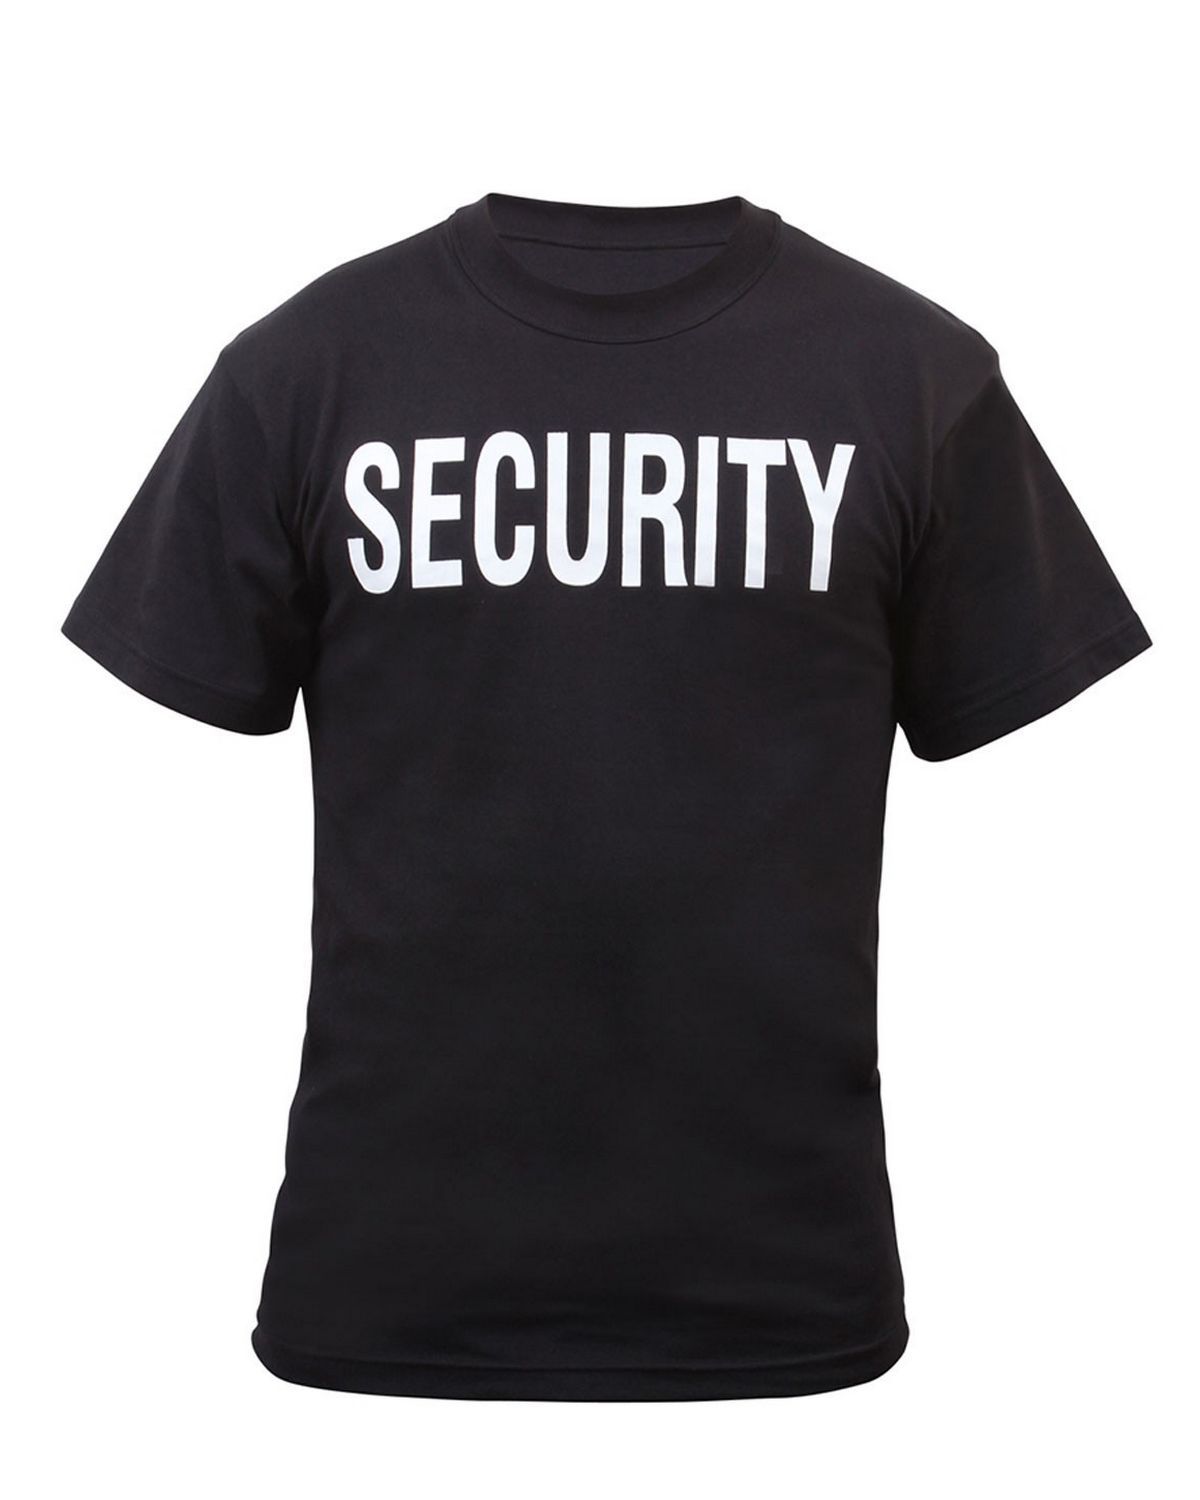 Rothco 6604 2 Sided Security T Shirt Shop At